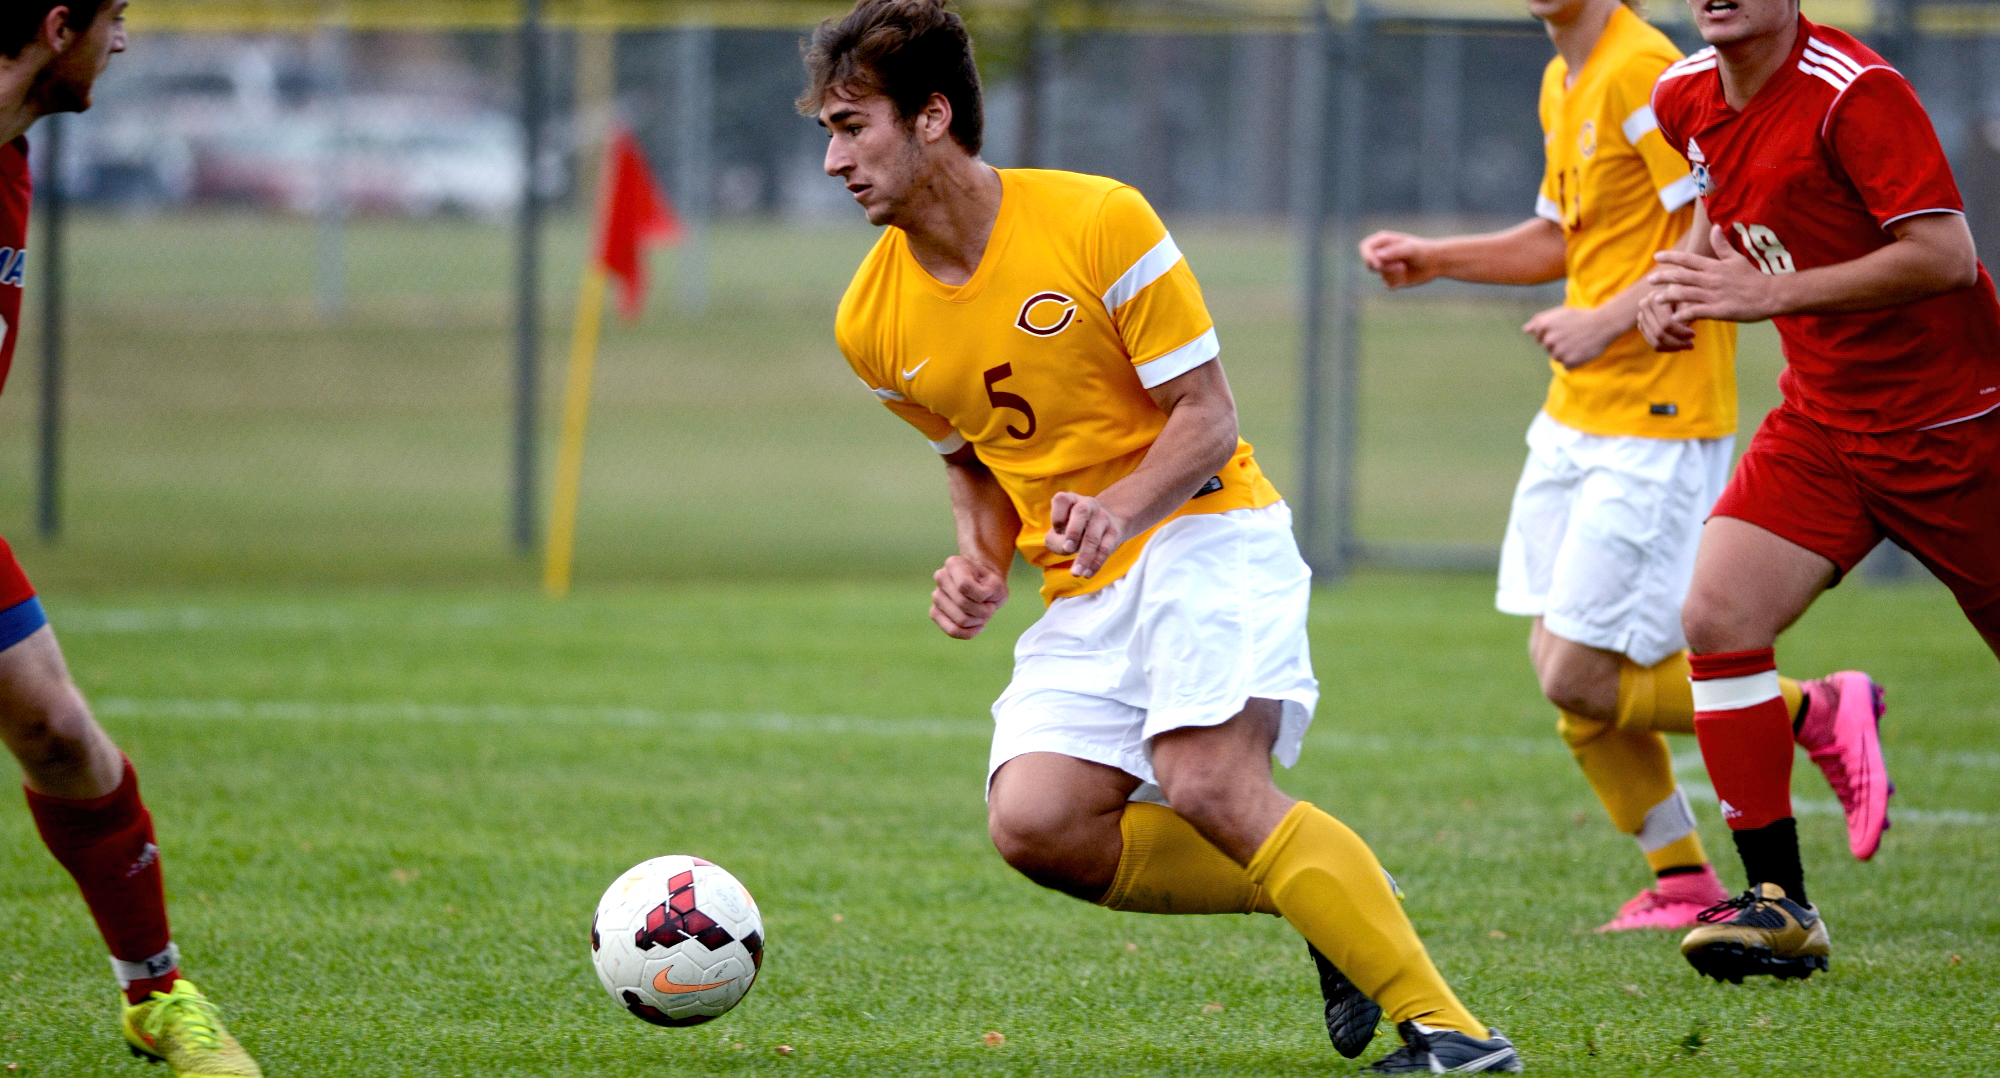 Senior Matthew Fulks scored the game-winning goal in the Cobbers' 1-0 non-conference win at Coe.